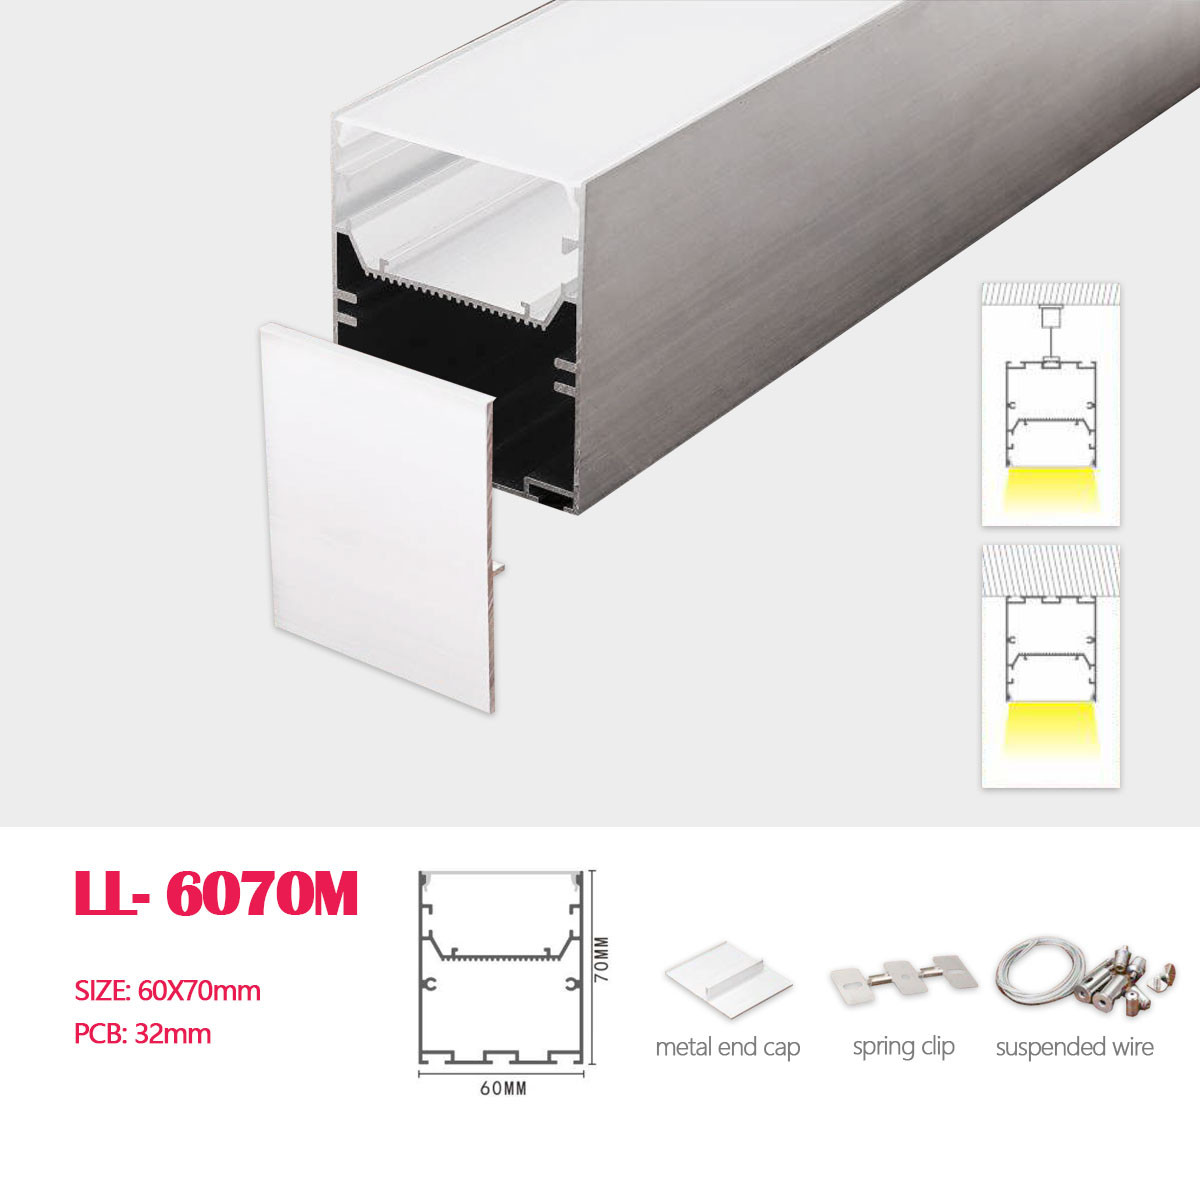 1M (3.28FT) 60MM*70MM Square Double-layer Aluminum Profile with Flat  cover ,Suspension wire,Suspended Mounting clips for Hanging or Surface Mounted LED Strip Lighting